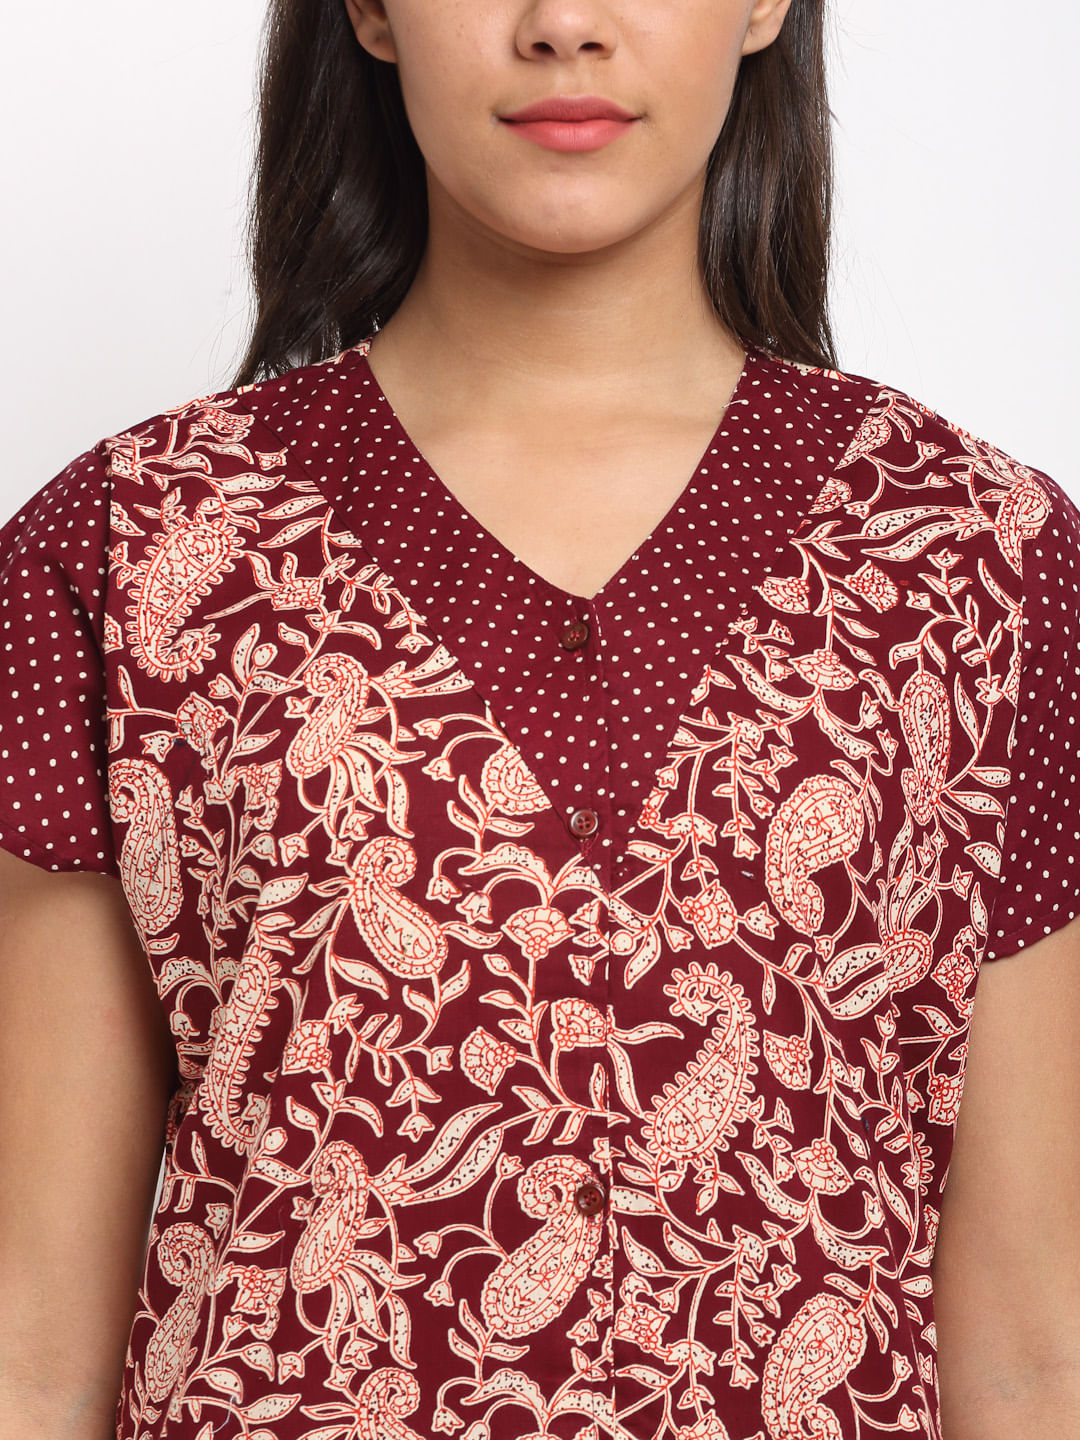 Maroon Printed Cotton Nighty (Free Size)